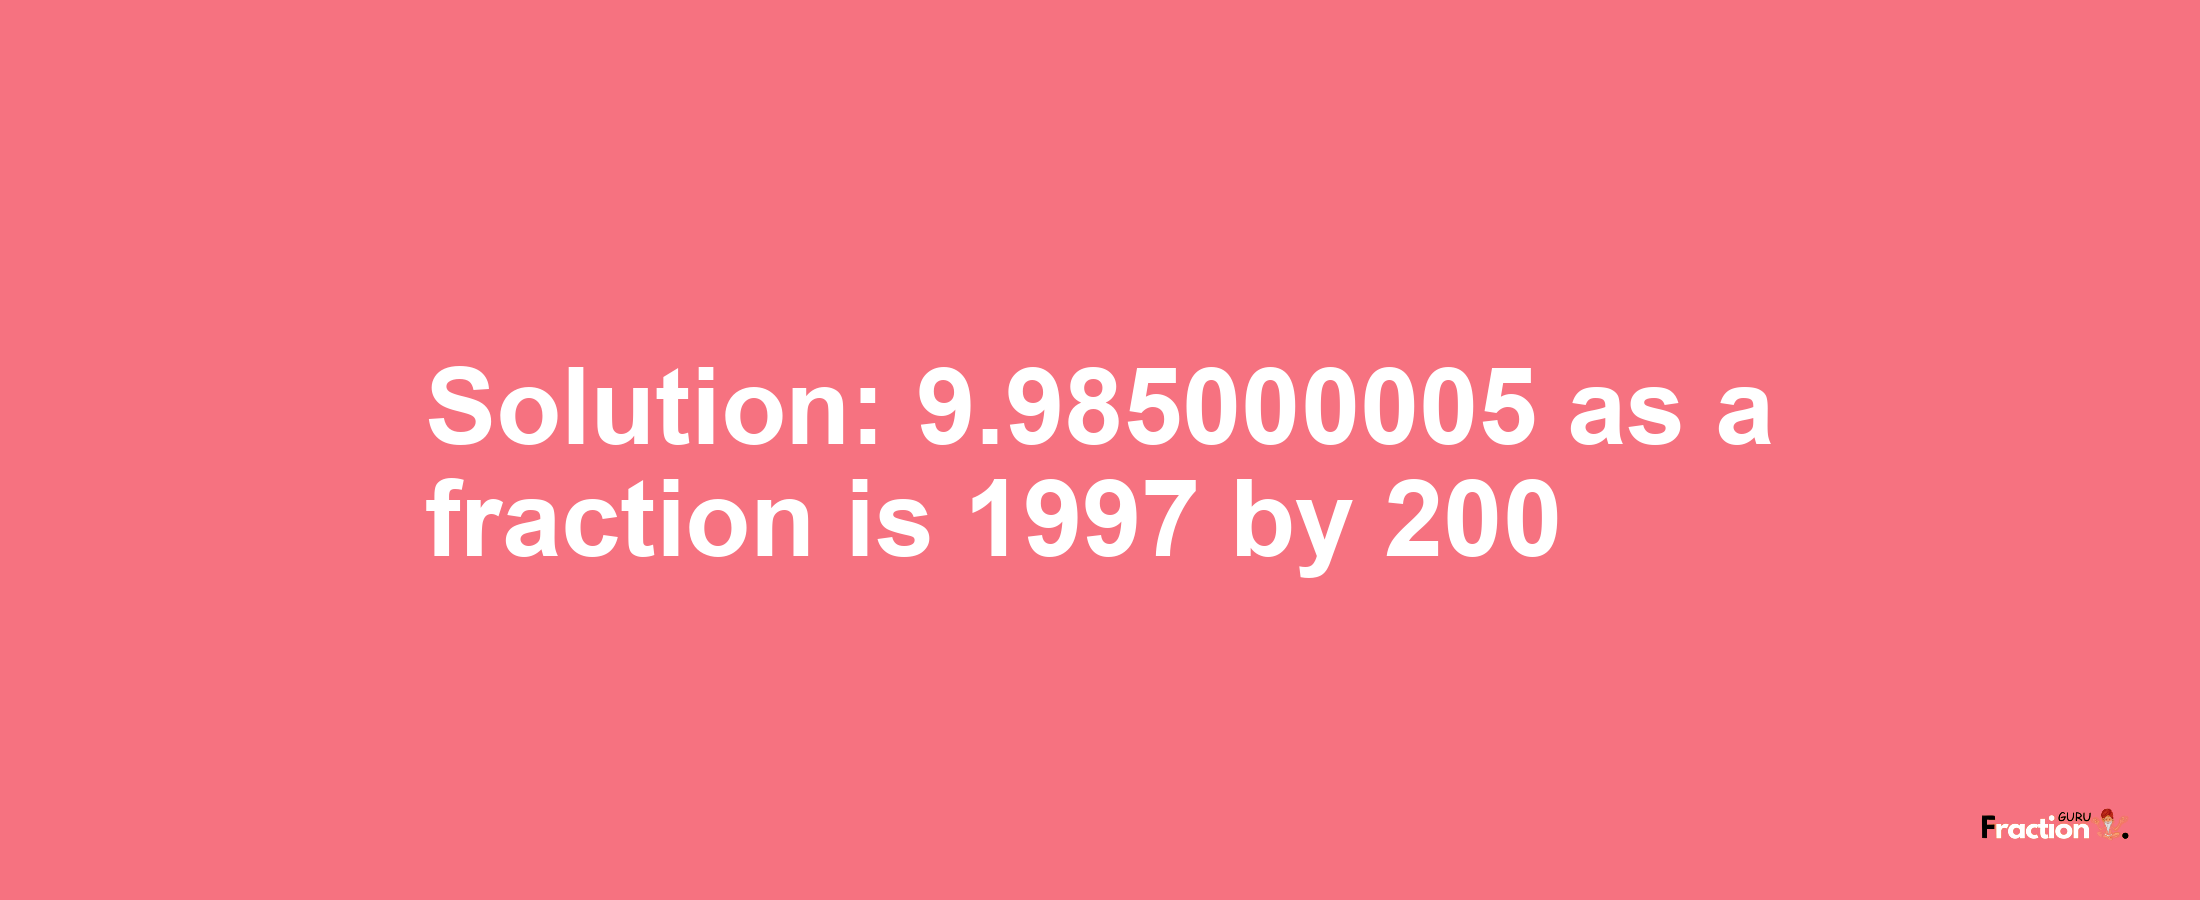 Solution:9.985000005 as a fraction is 1997/200